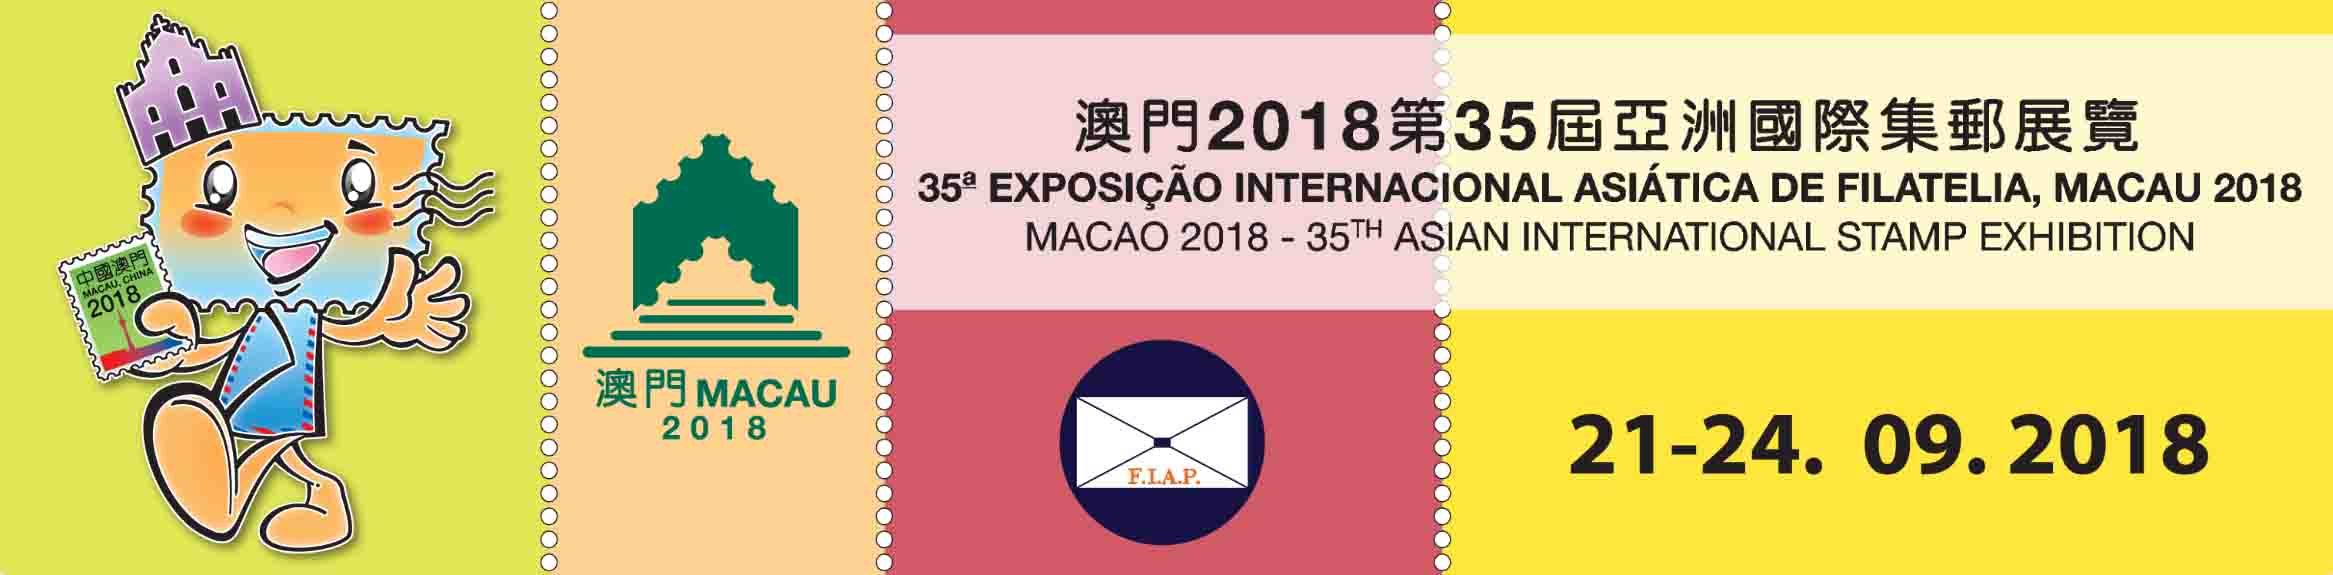 The Macao 2018 - 35th Asian International Stamp Exhibition